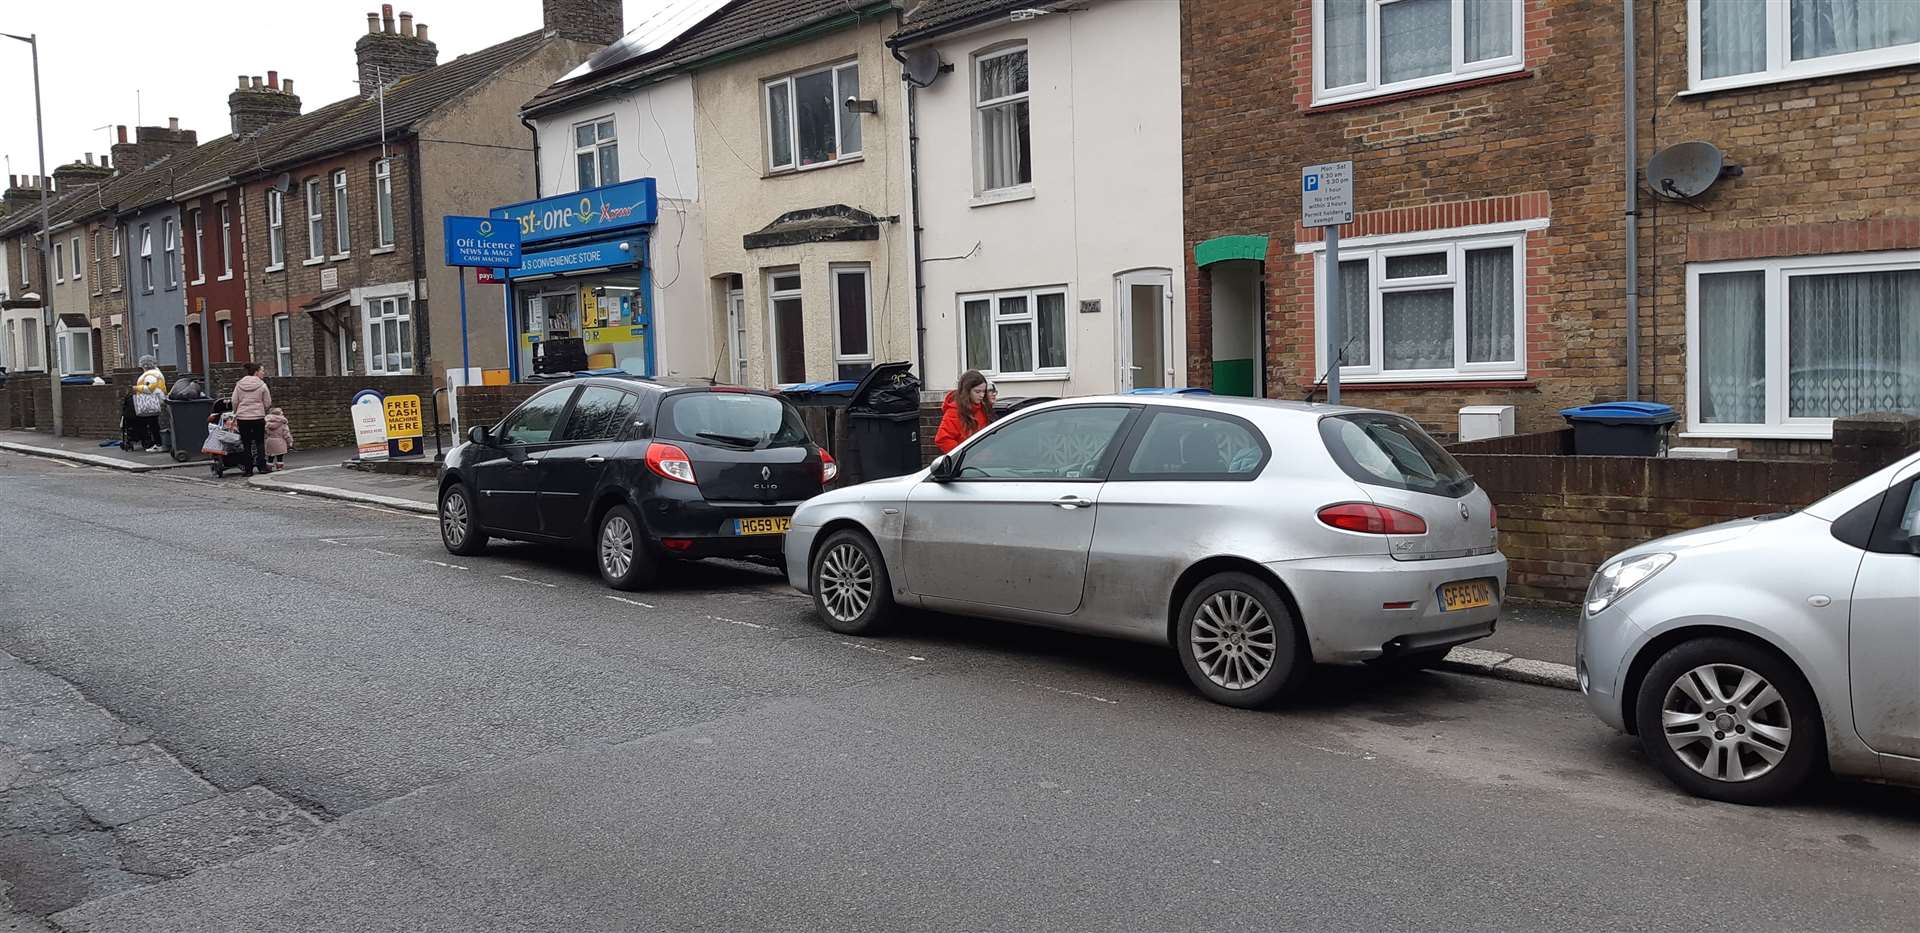 Parking on Coombe Valley Road. It is not known whether these vehicles belong to residents or hospital visitors